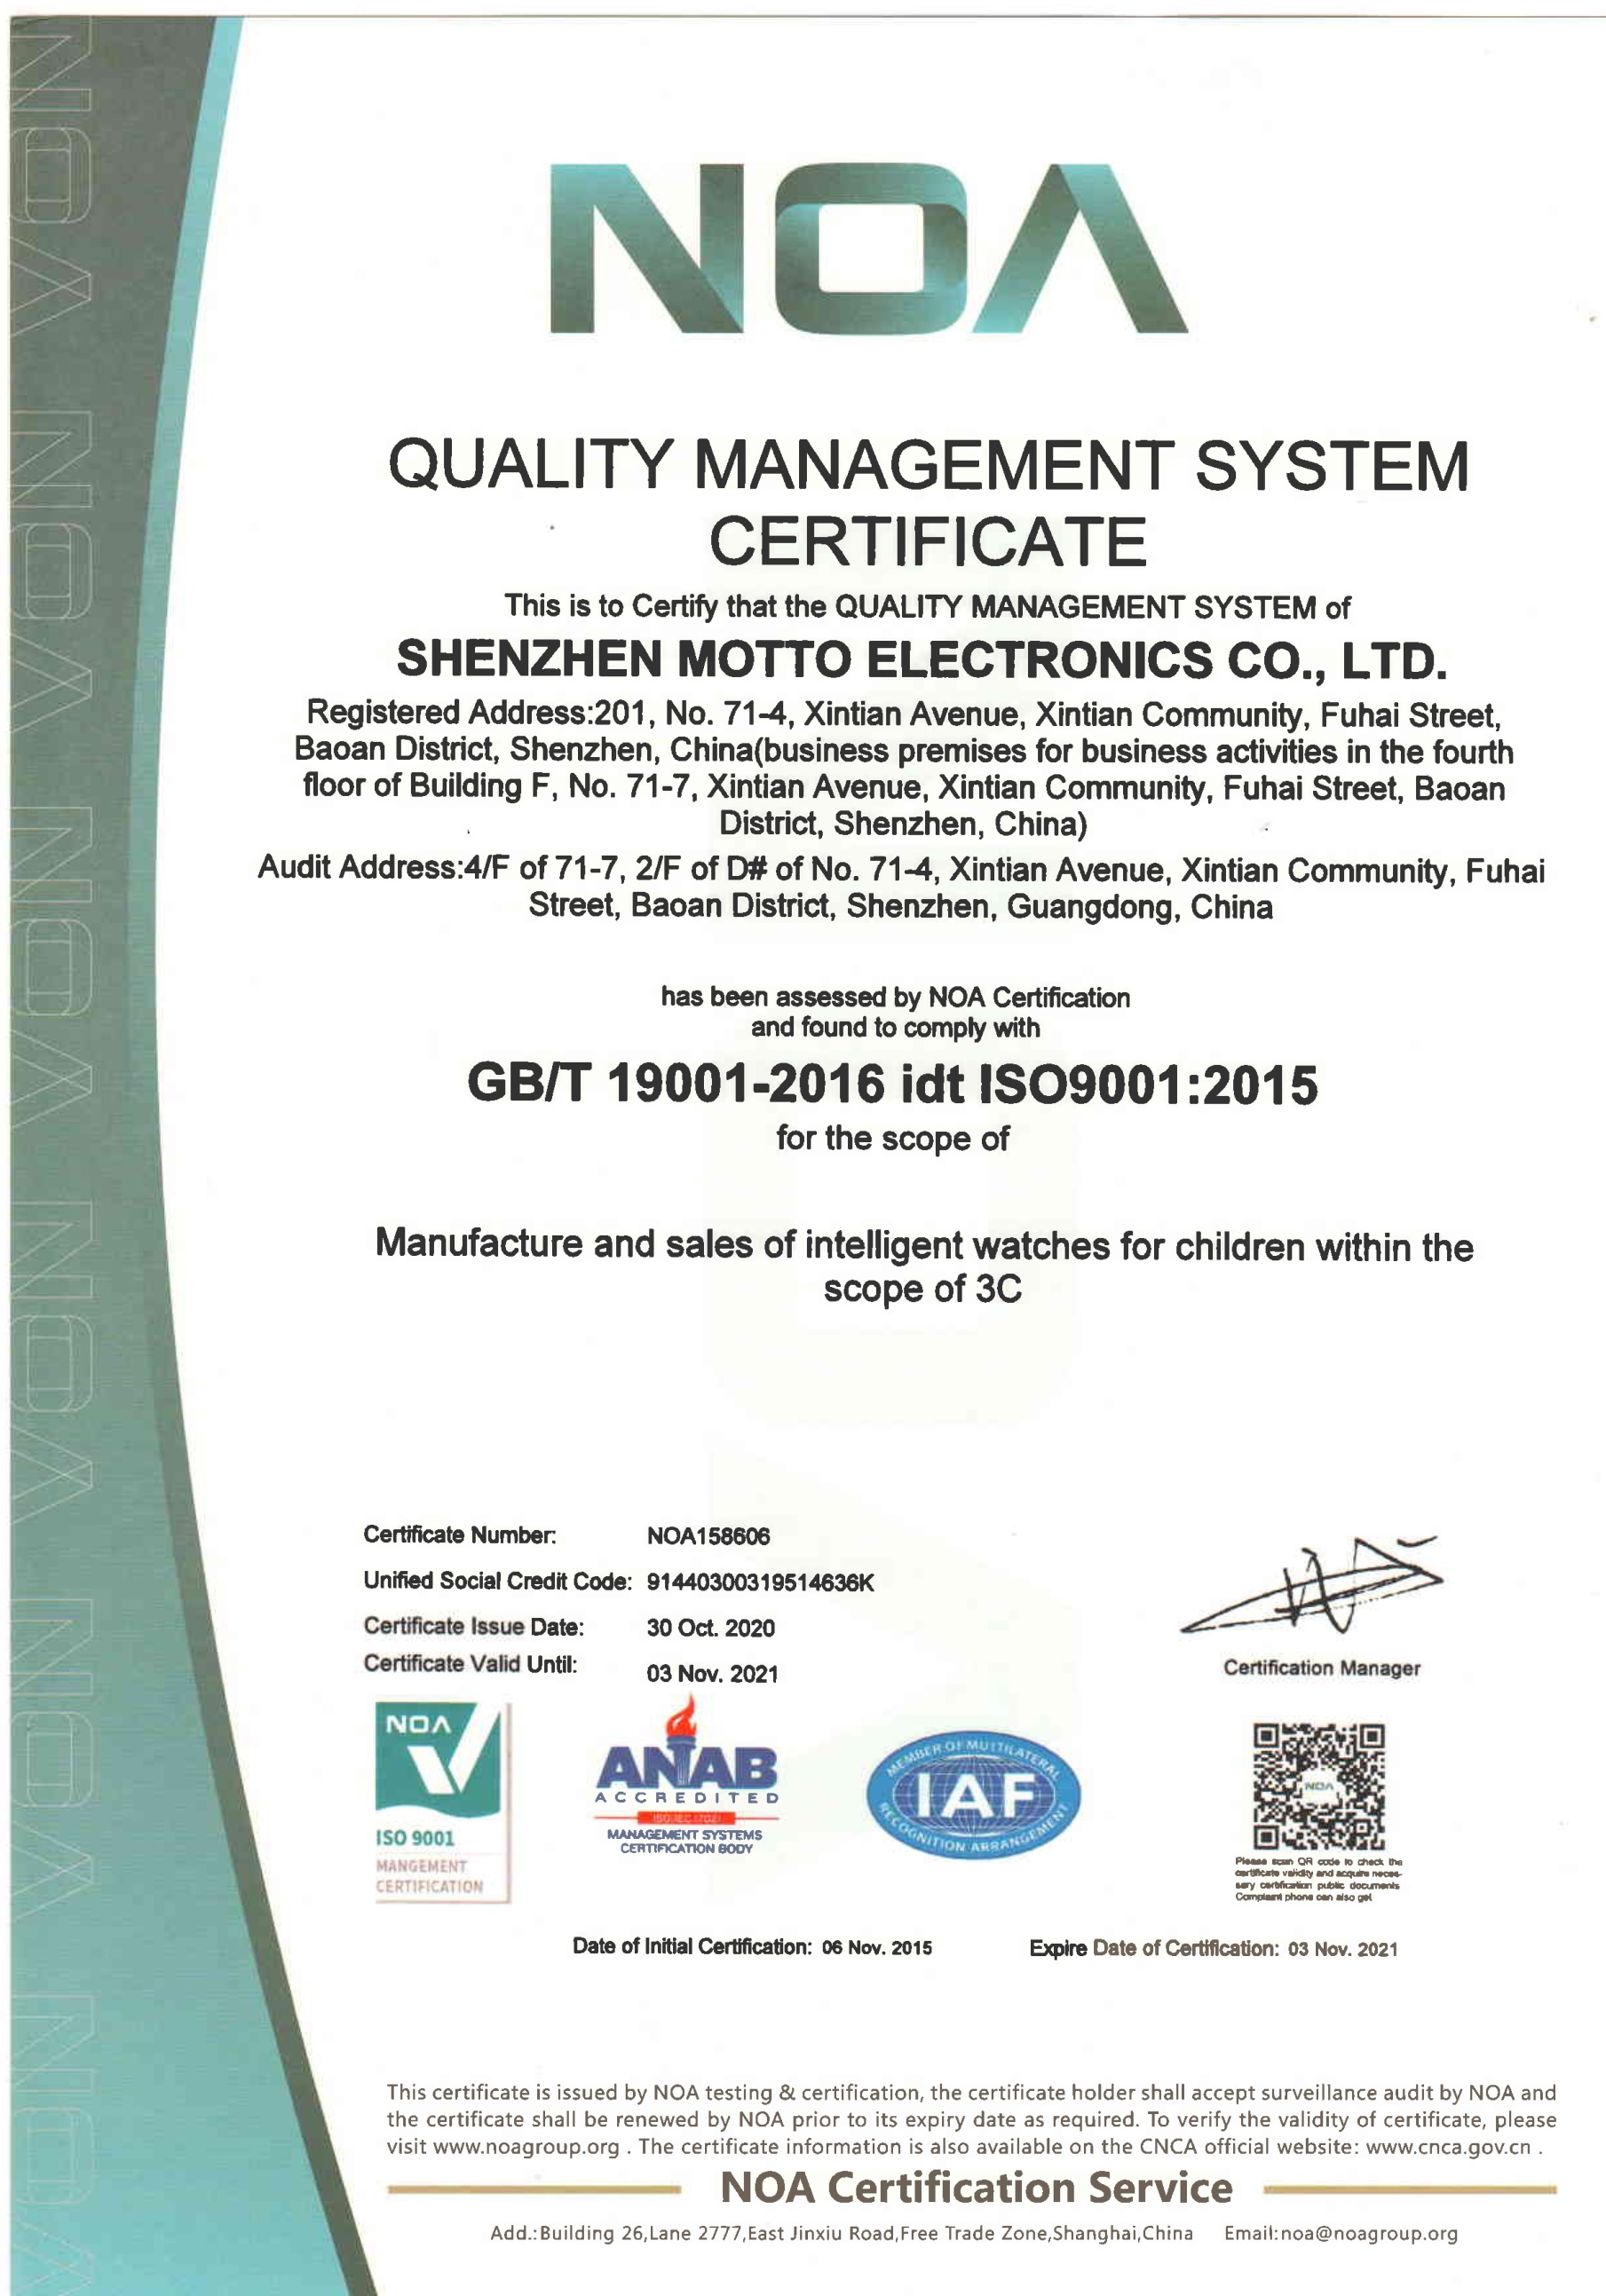 Certifications attained by Shenzhen Motto Electronics Co. Ltd